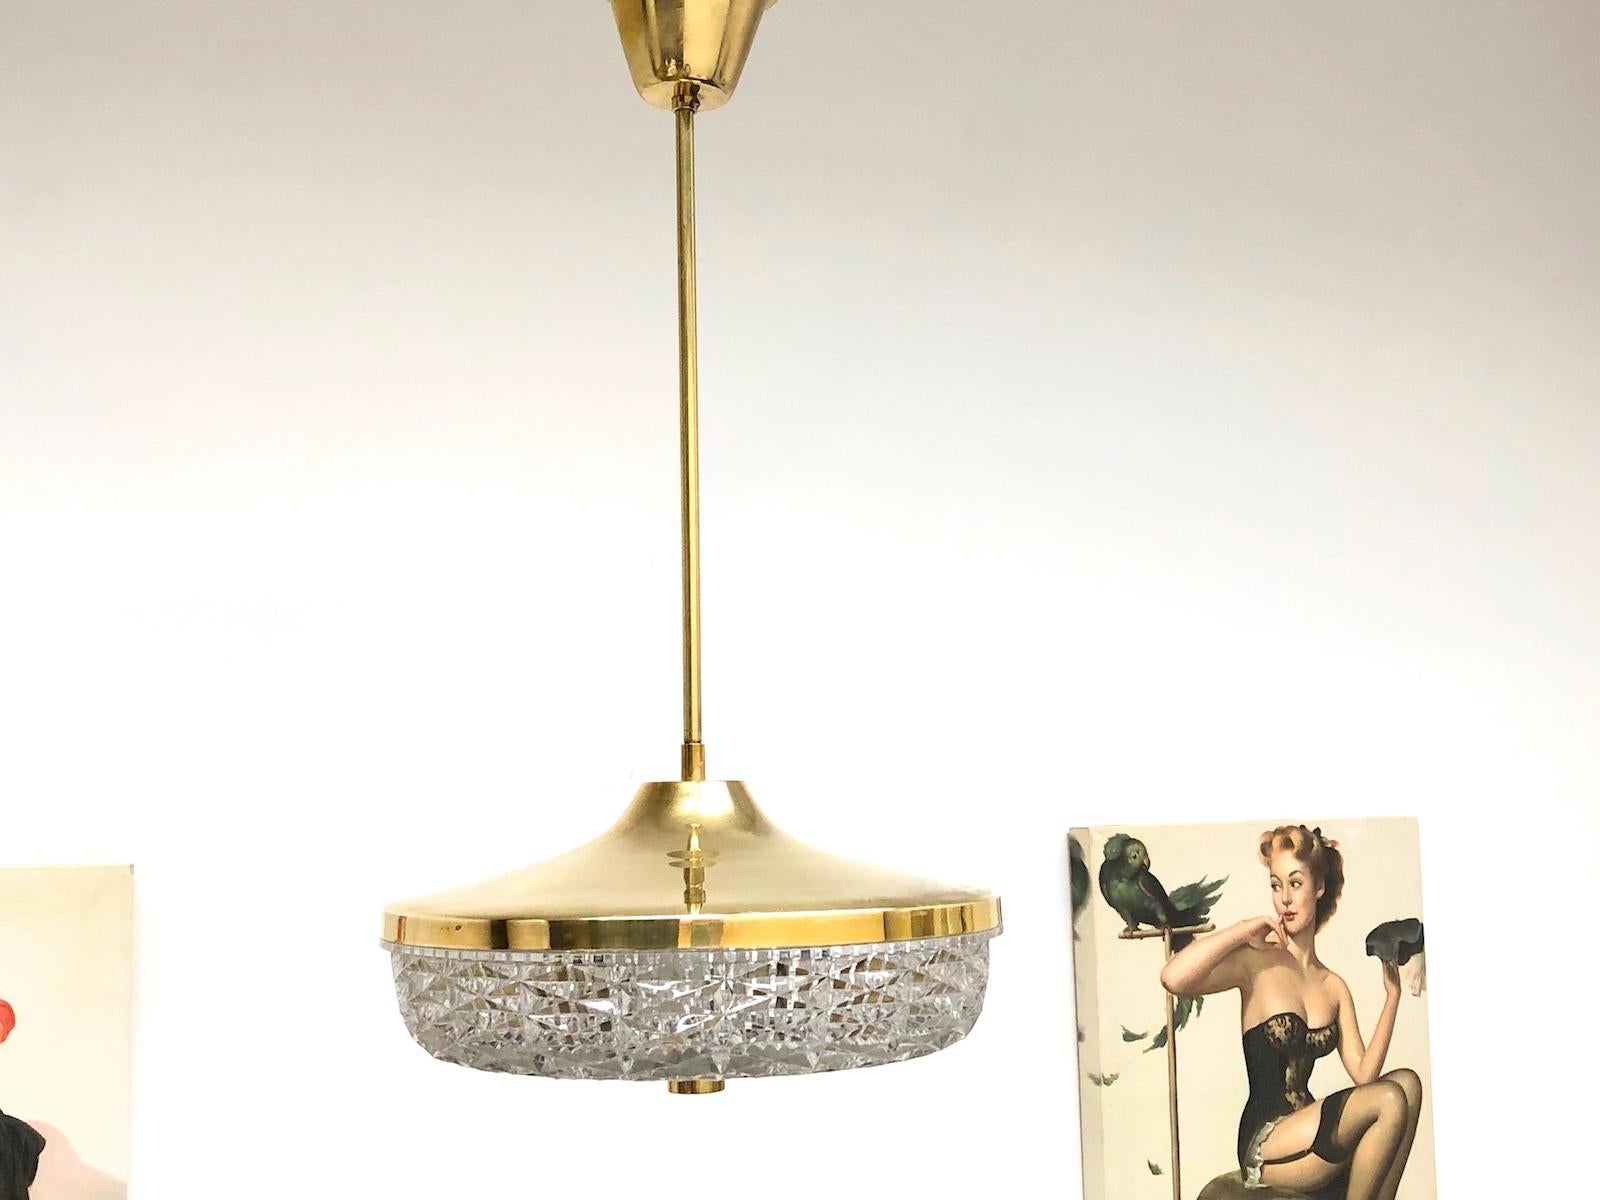 Beautiful crystal glass pendant light by Carl Fagerlund for Orrefors in the 1960s - gorgeous Scandinavian lamp with crystal glass and brass, in beautiful vintage condition. The chandelier requires four European E14 candelabra bulbs, each up to 40